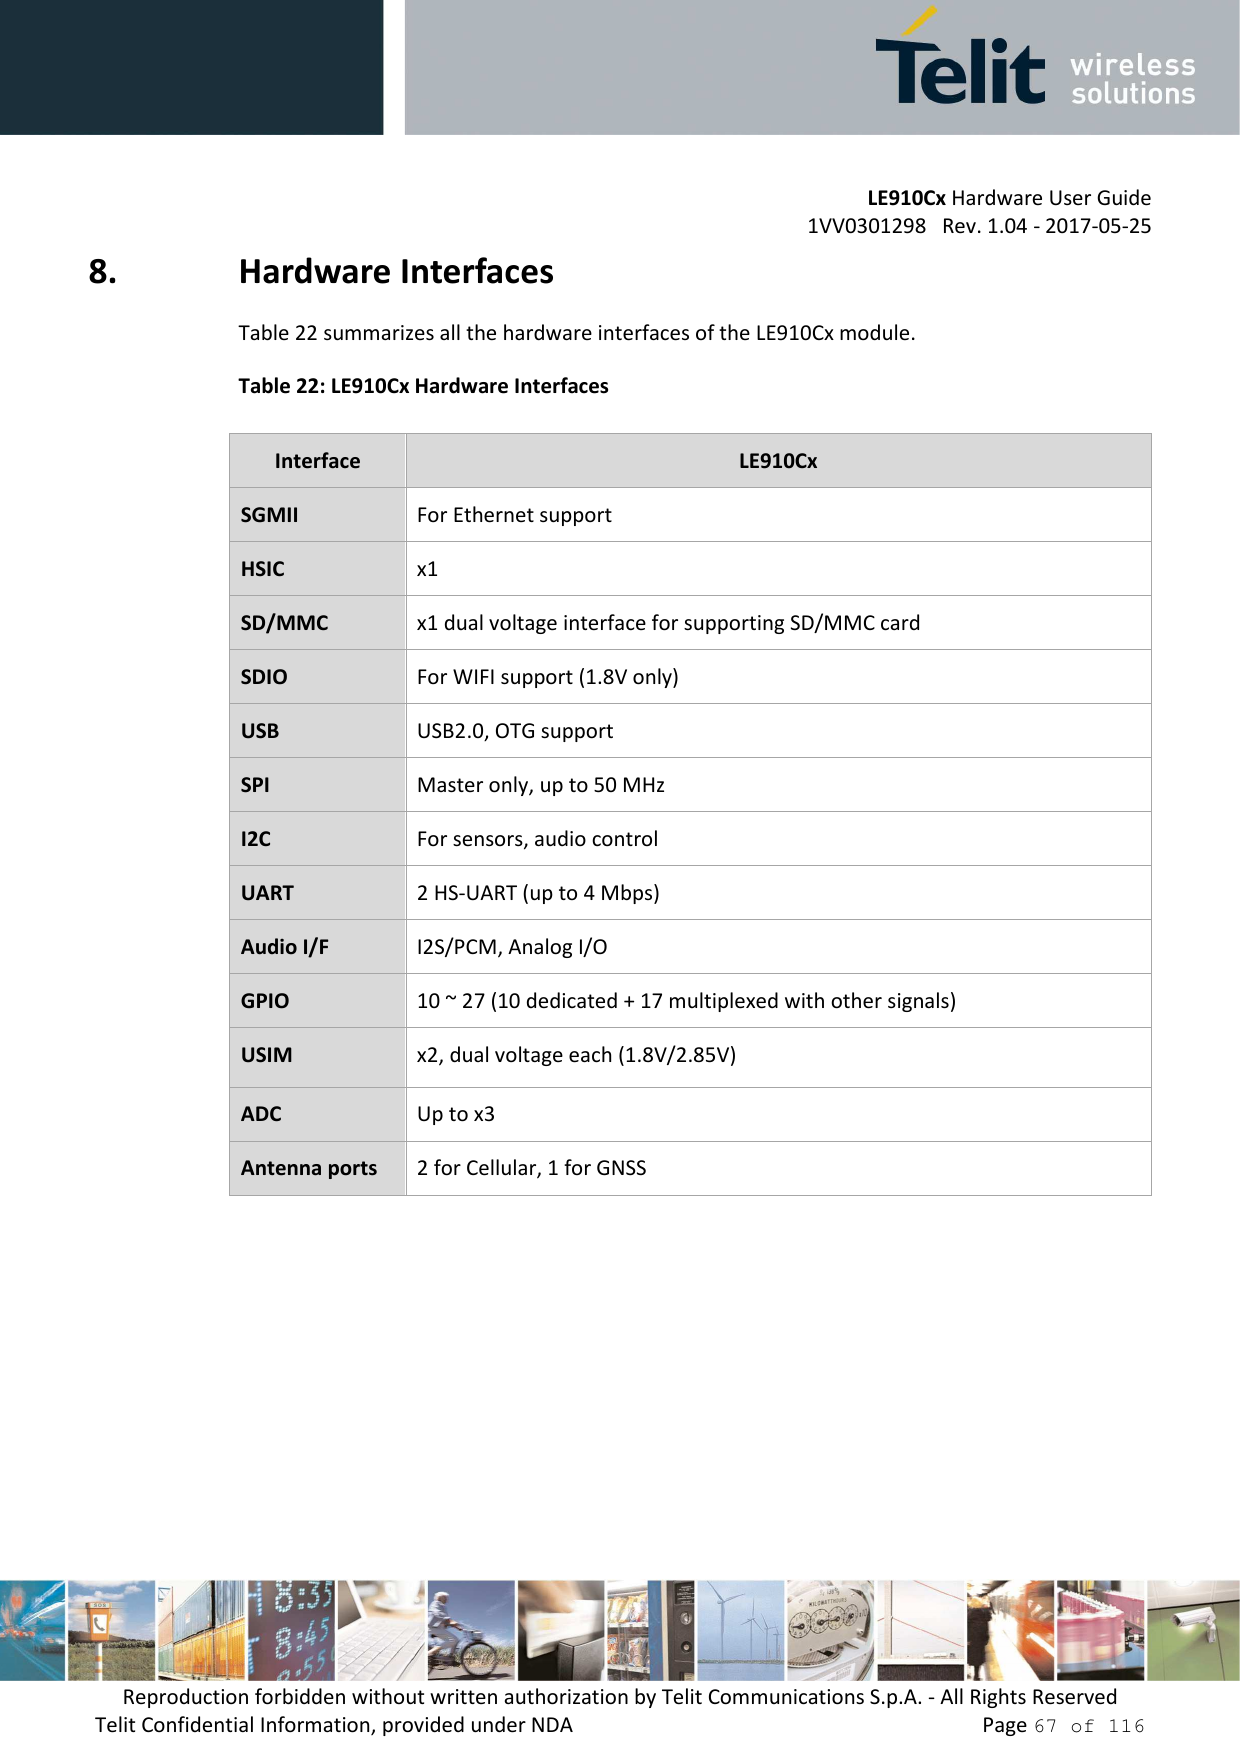         LE910Cx Hardware User Guide 1VV0301298   Rev. 1.04 - 2017-05-25 Reproduction forbidden without written authorization by Telit Communications S.p.A. - All Rights Reserved Telit Confidential Information, provided under NDA                 Page 67 of 116 8. Hardware Interfaces Table 22 summarizes all the hardware interfaces of the LE910Cx module. Table 22: LE910Cx Hardware Interfaces    Interface  LE910Cx SGMII  For Ethernet support  HSIC  x1 SD/MMC  x1 dual voltage interface for supporting SD/MMC card SDIO  For WIFI support (1.8V only) USB  USB2.0, OTG support SPI  Master only, up to 50 MHz  I2C  For sensors, audio control UART  2 HS-UART (up to 4 Mbps) Audio I/F  I2S/PCM, Analog I/O GPIO  10 ~ 27 (10 dedicated + 17 multiplexed with other signals) USIM  x2, dual voltage each (1.8V/2.85V) ADC  Up to x3 Antenna ports  2 for Cellular, 1 for GNSS 